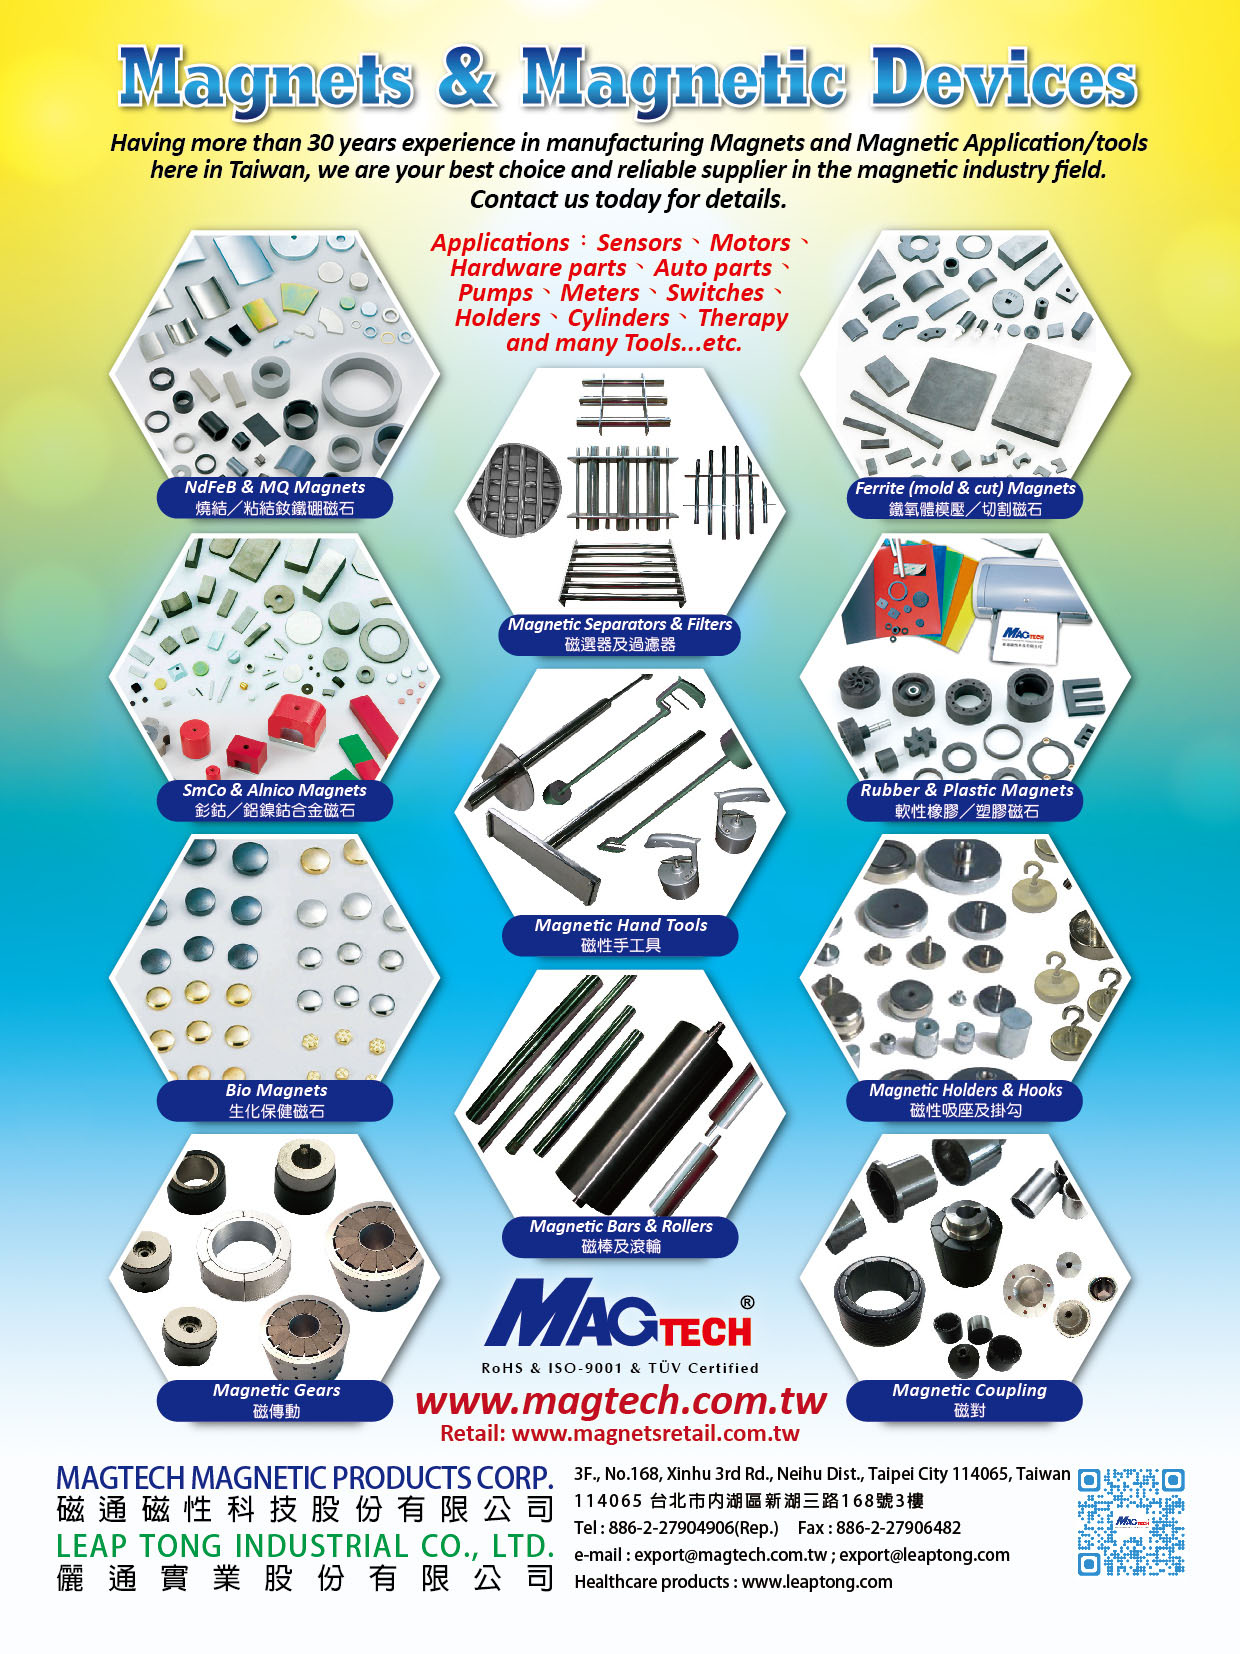 MAGTECH MAGNETIC PRODUCTS CORP. (LEAP TONG) , Magnets & Magnetic Dvices , Magnetic tools